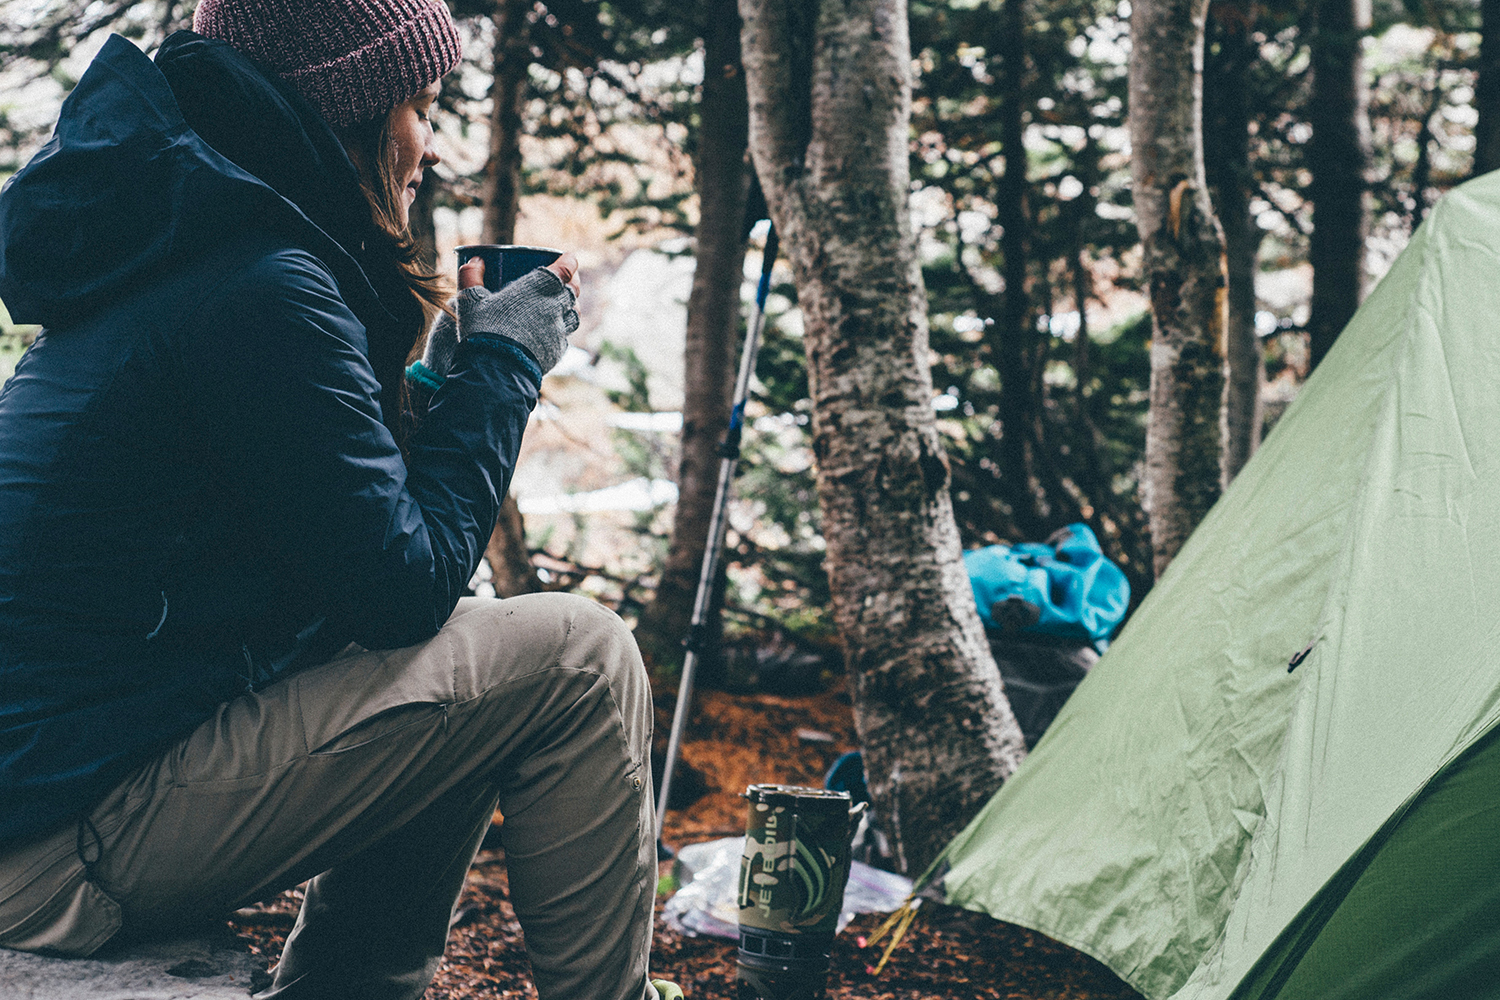 How to Make Great Coffee While Camping or Backpacking